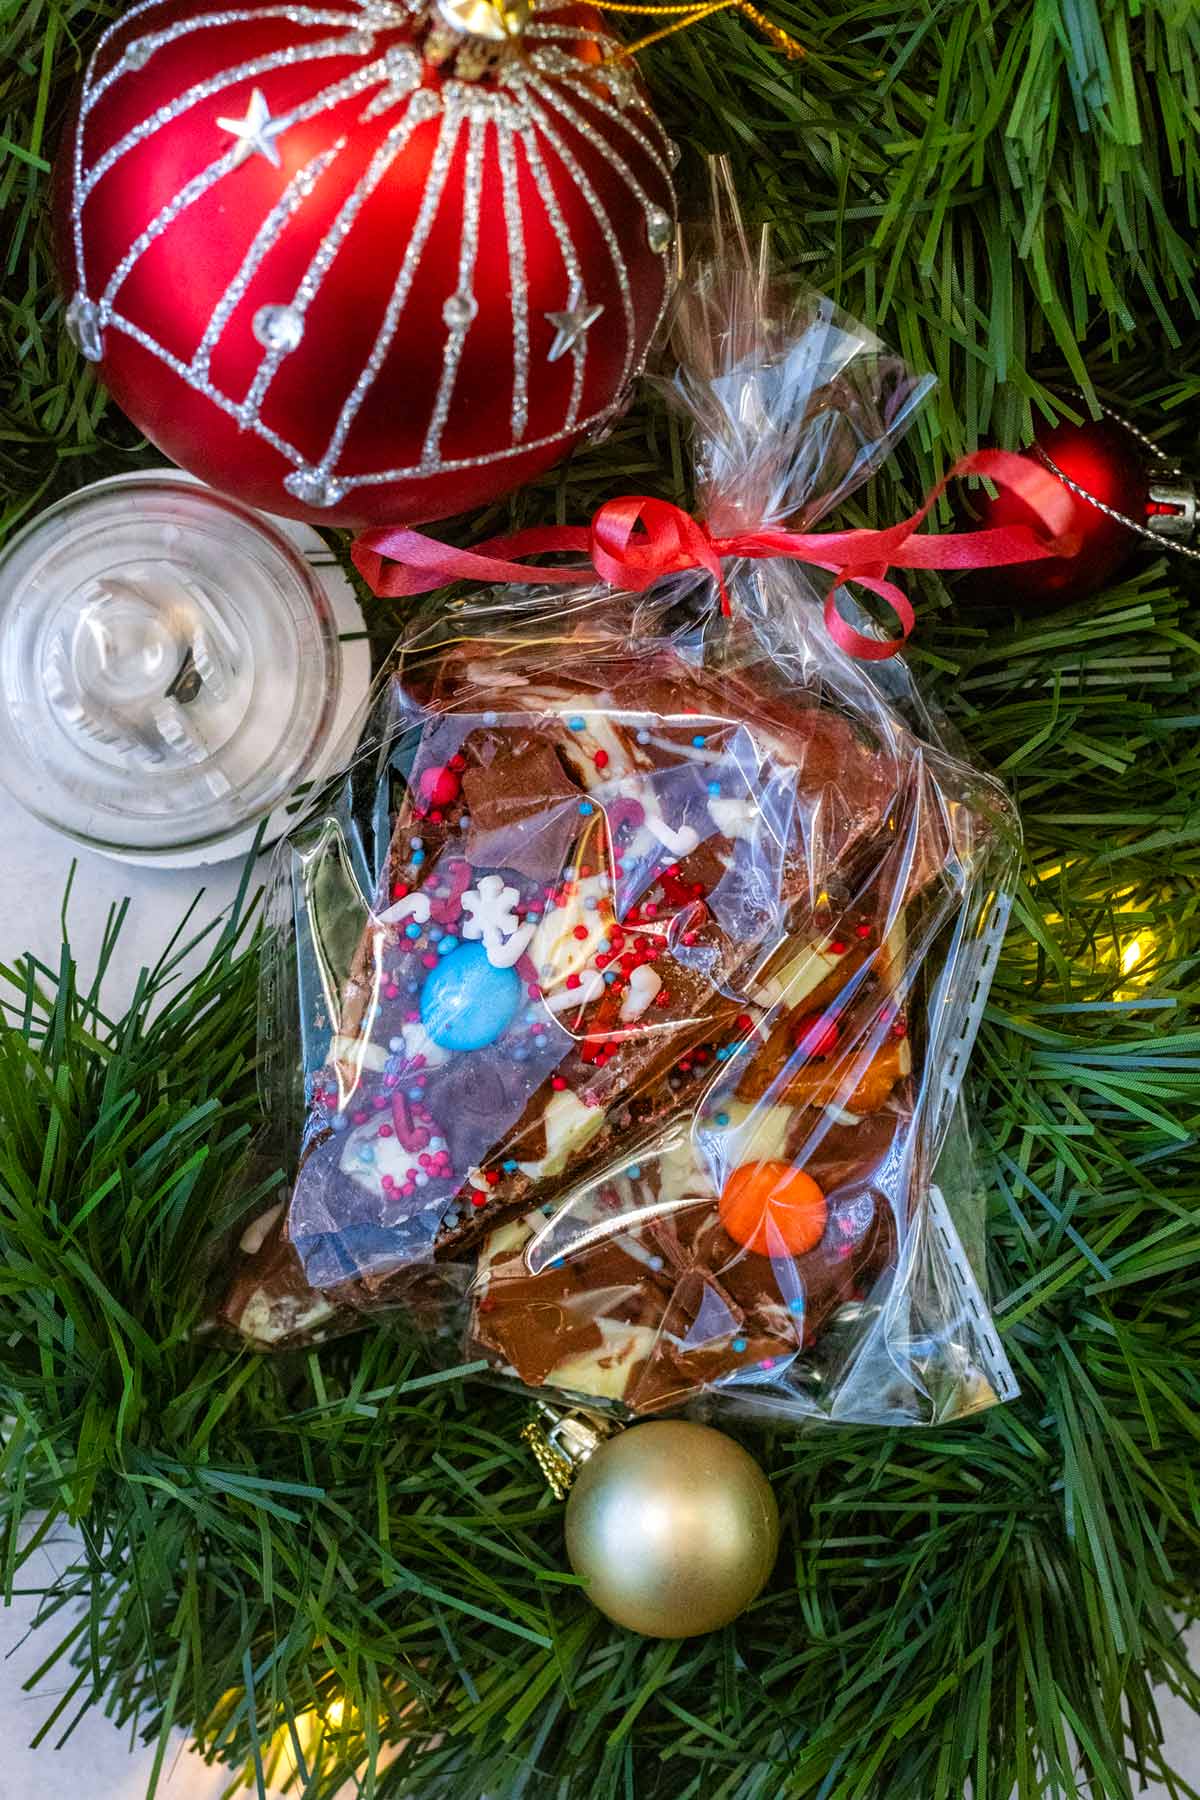 A cellophane bag full of chocolate bark surrounded by a Christmas garland.